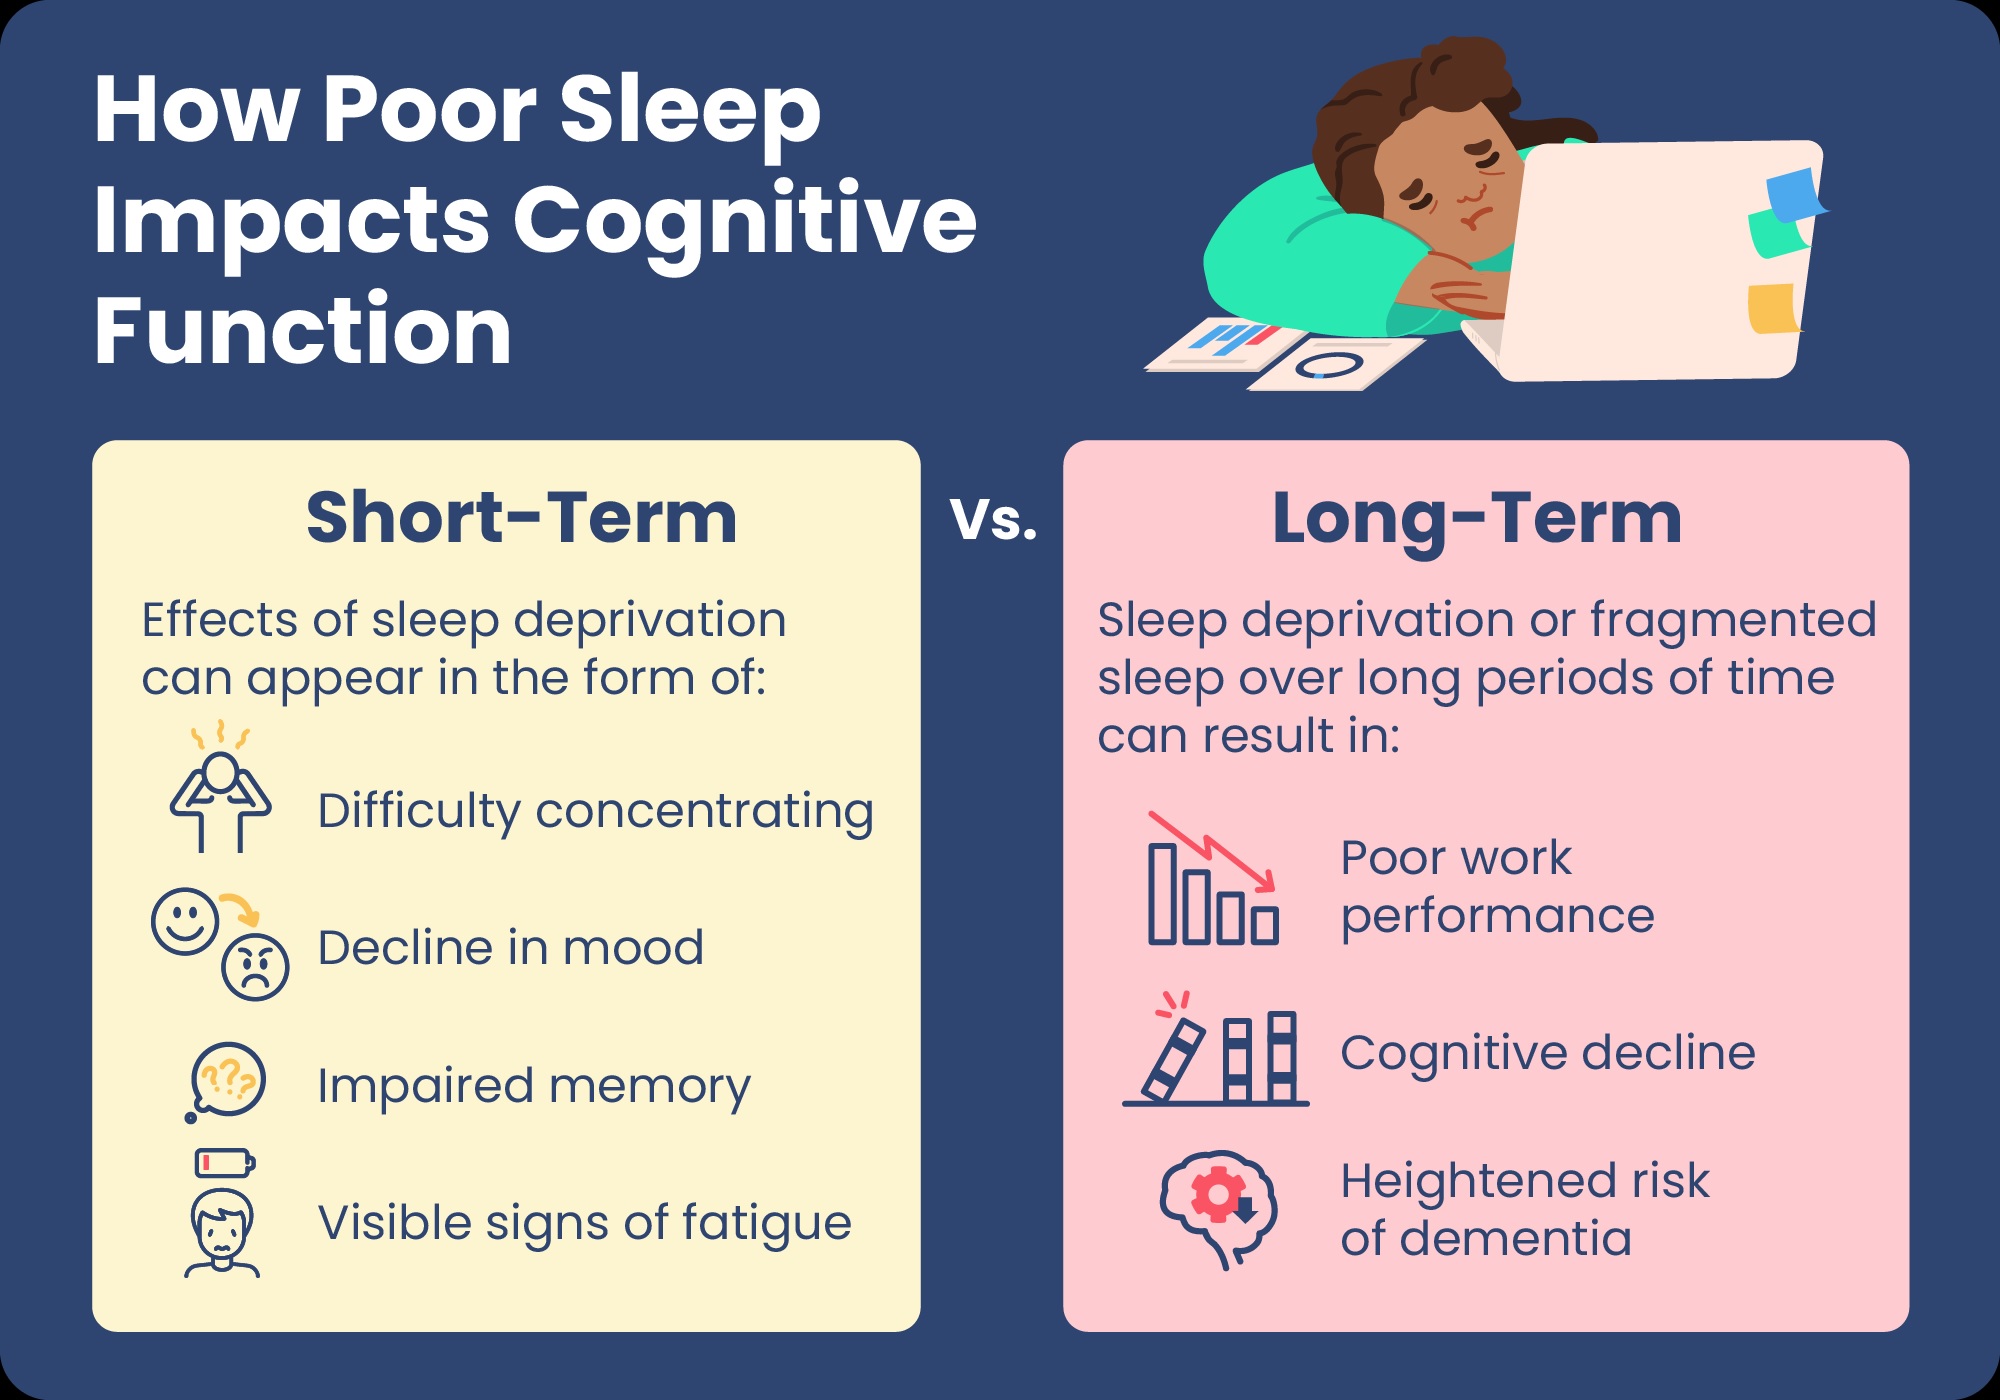 How poor sleep impacts cognitive function